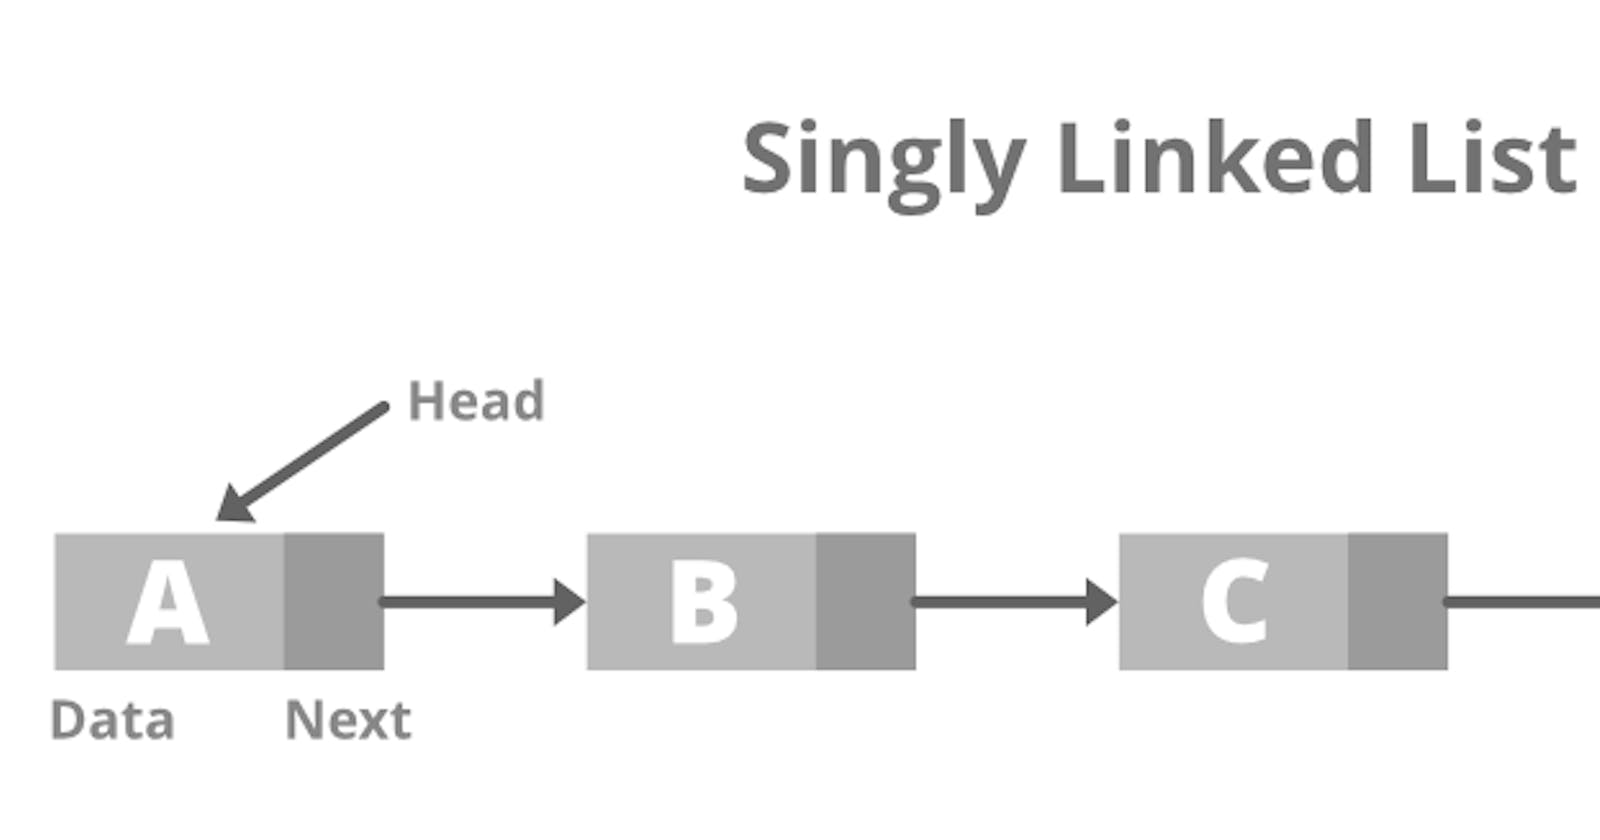 Data structures - Singly linked lists